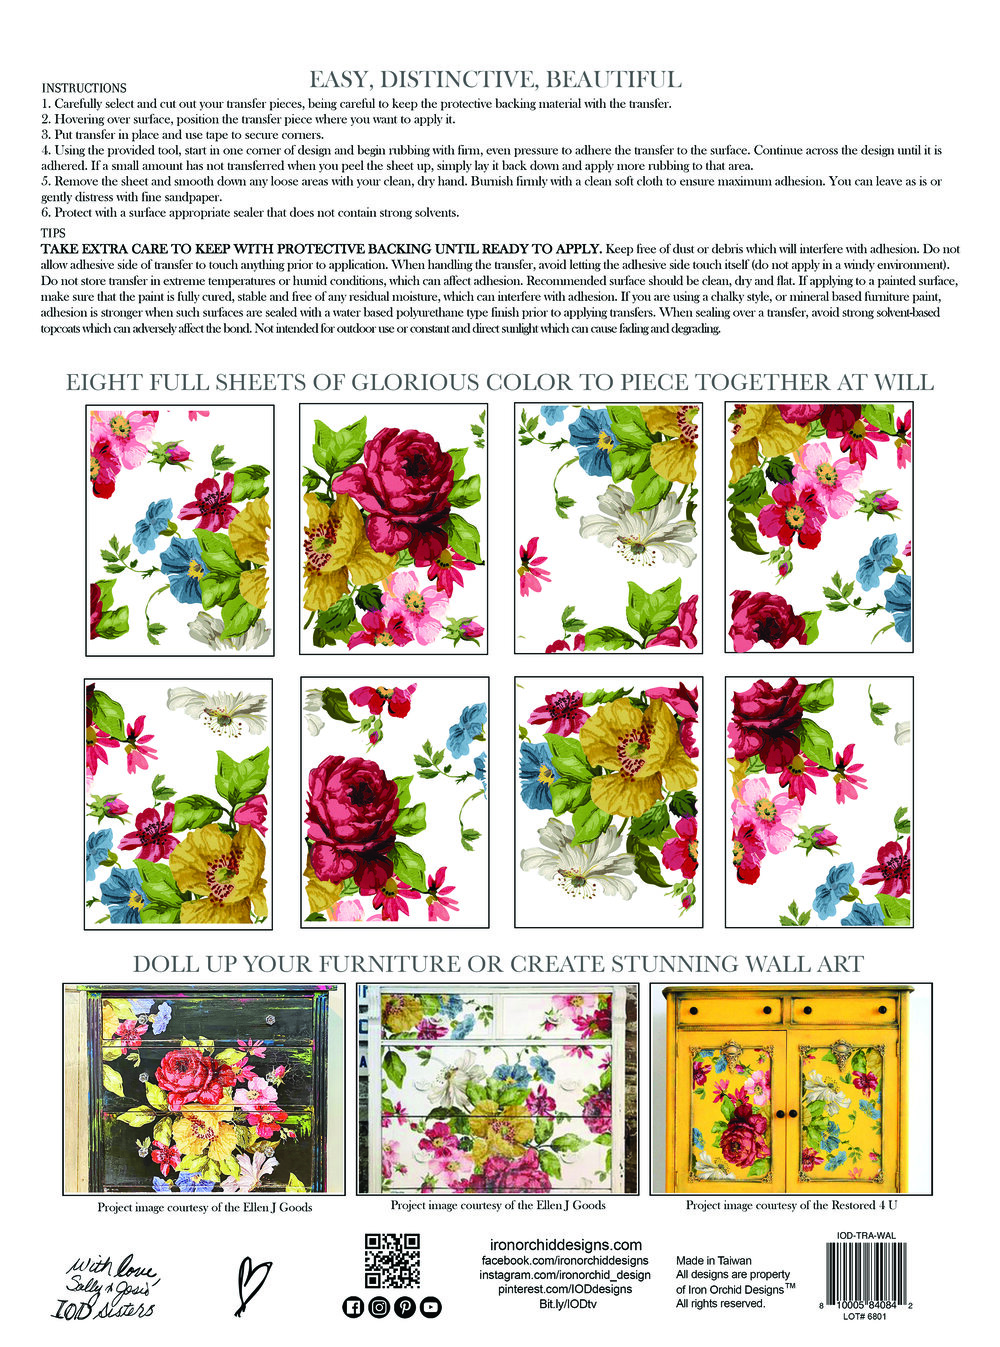 IOD Decor Transfer Midnight Garden (pad of 4 12x16 sheets) by Iron Orchid  Designs — Texas In-Laws